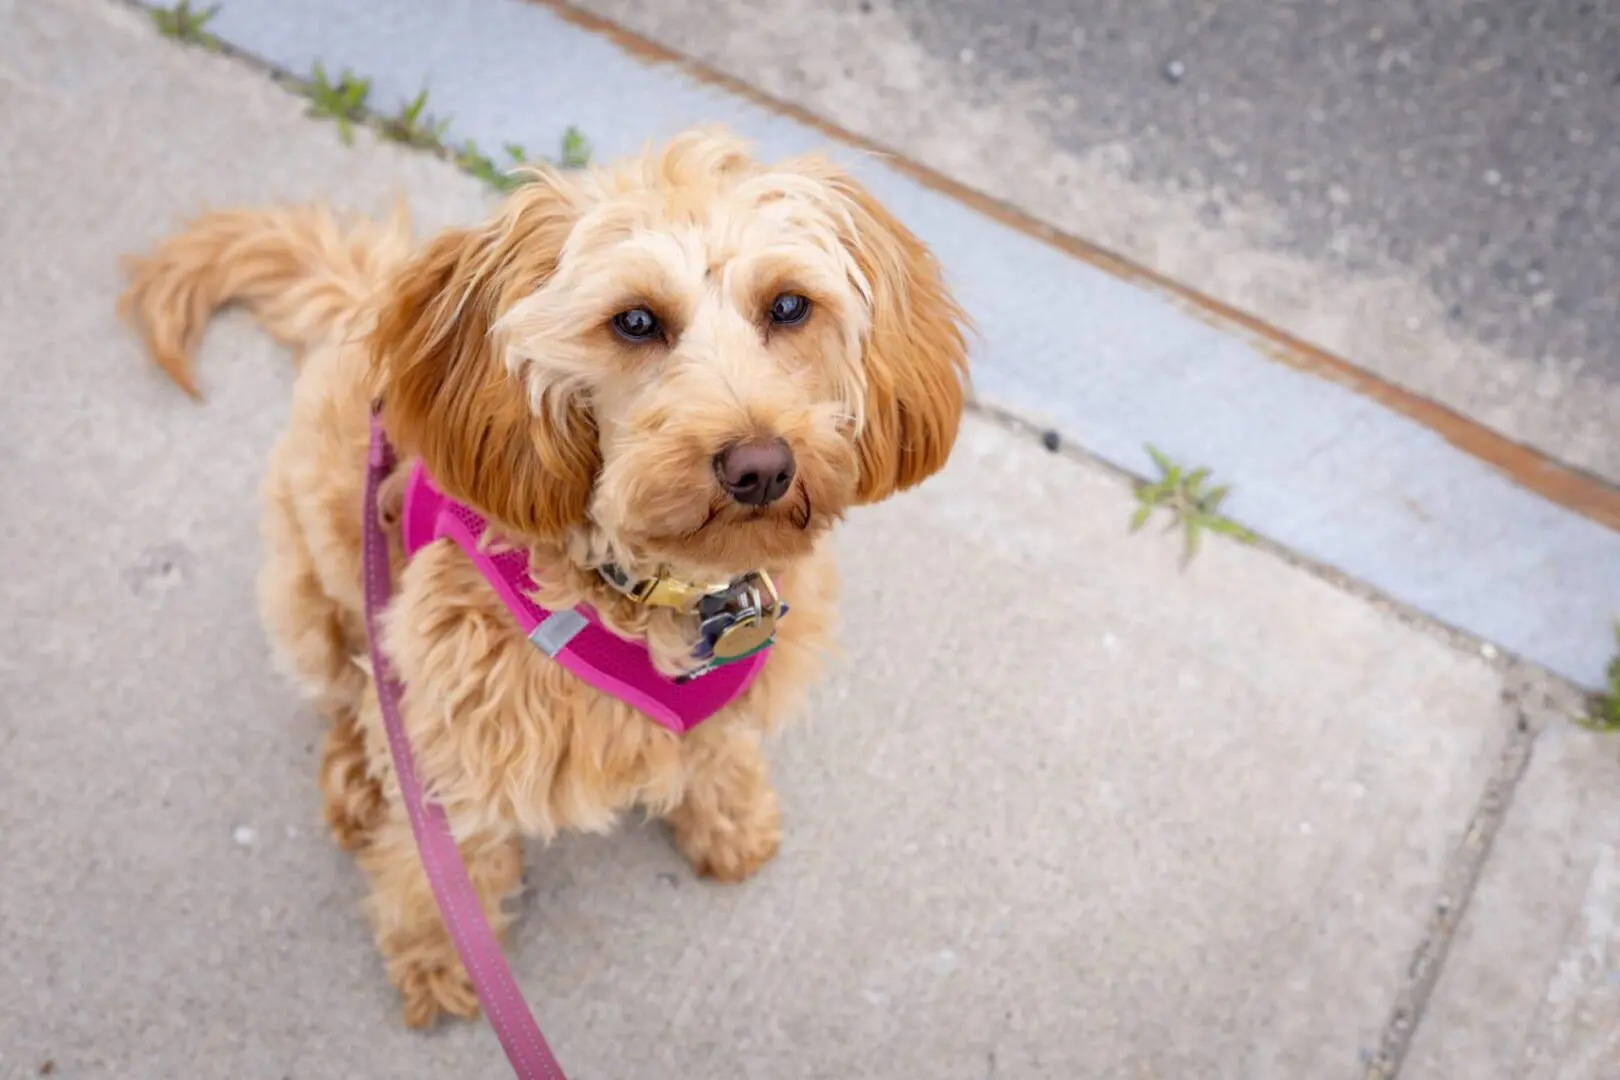 A dog with a pink leash on the sidewalk.